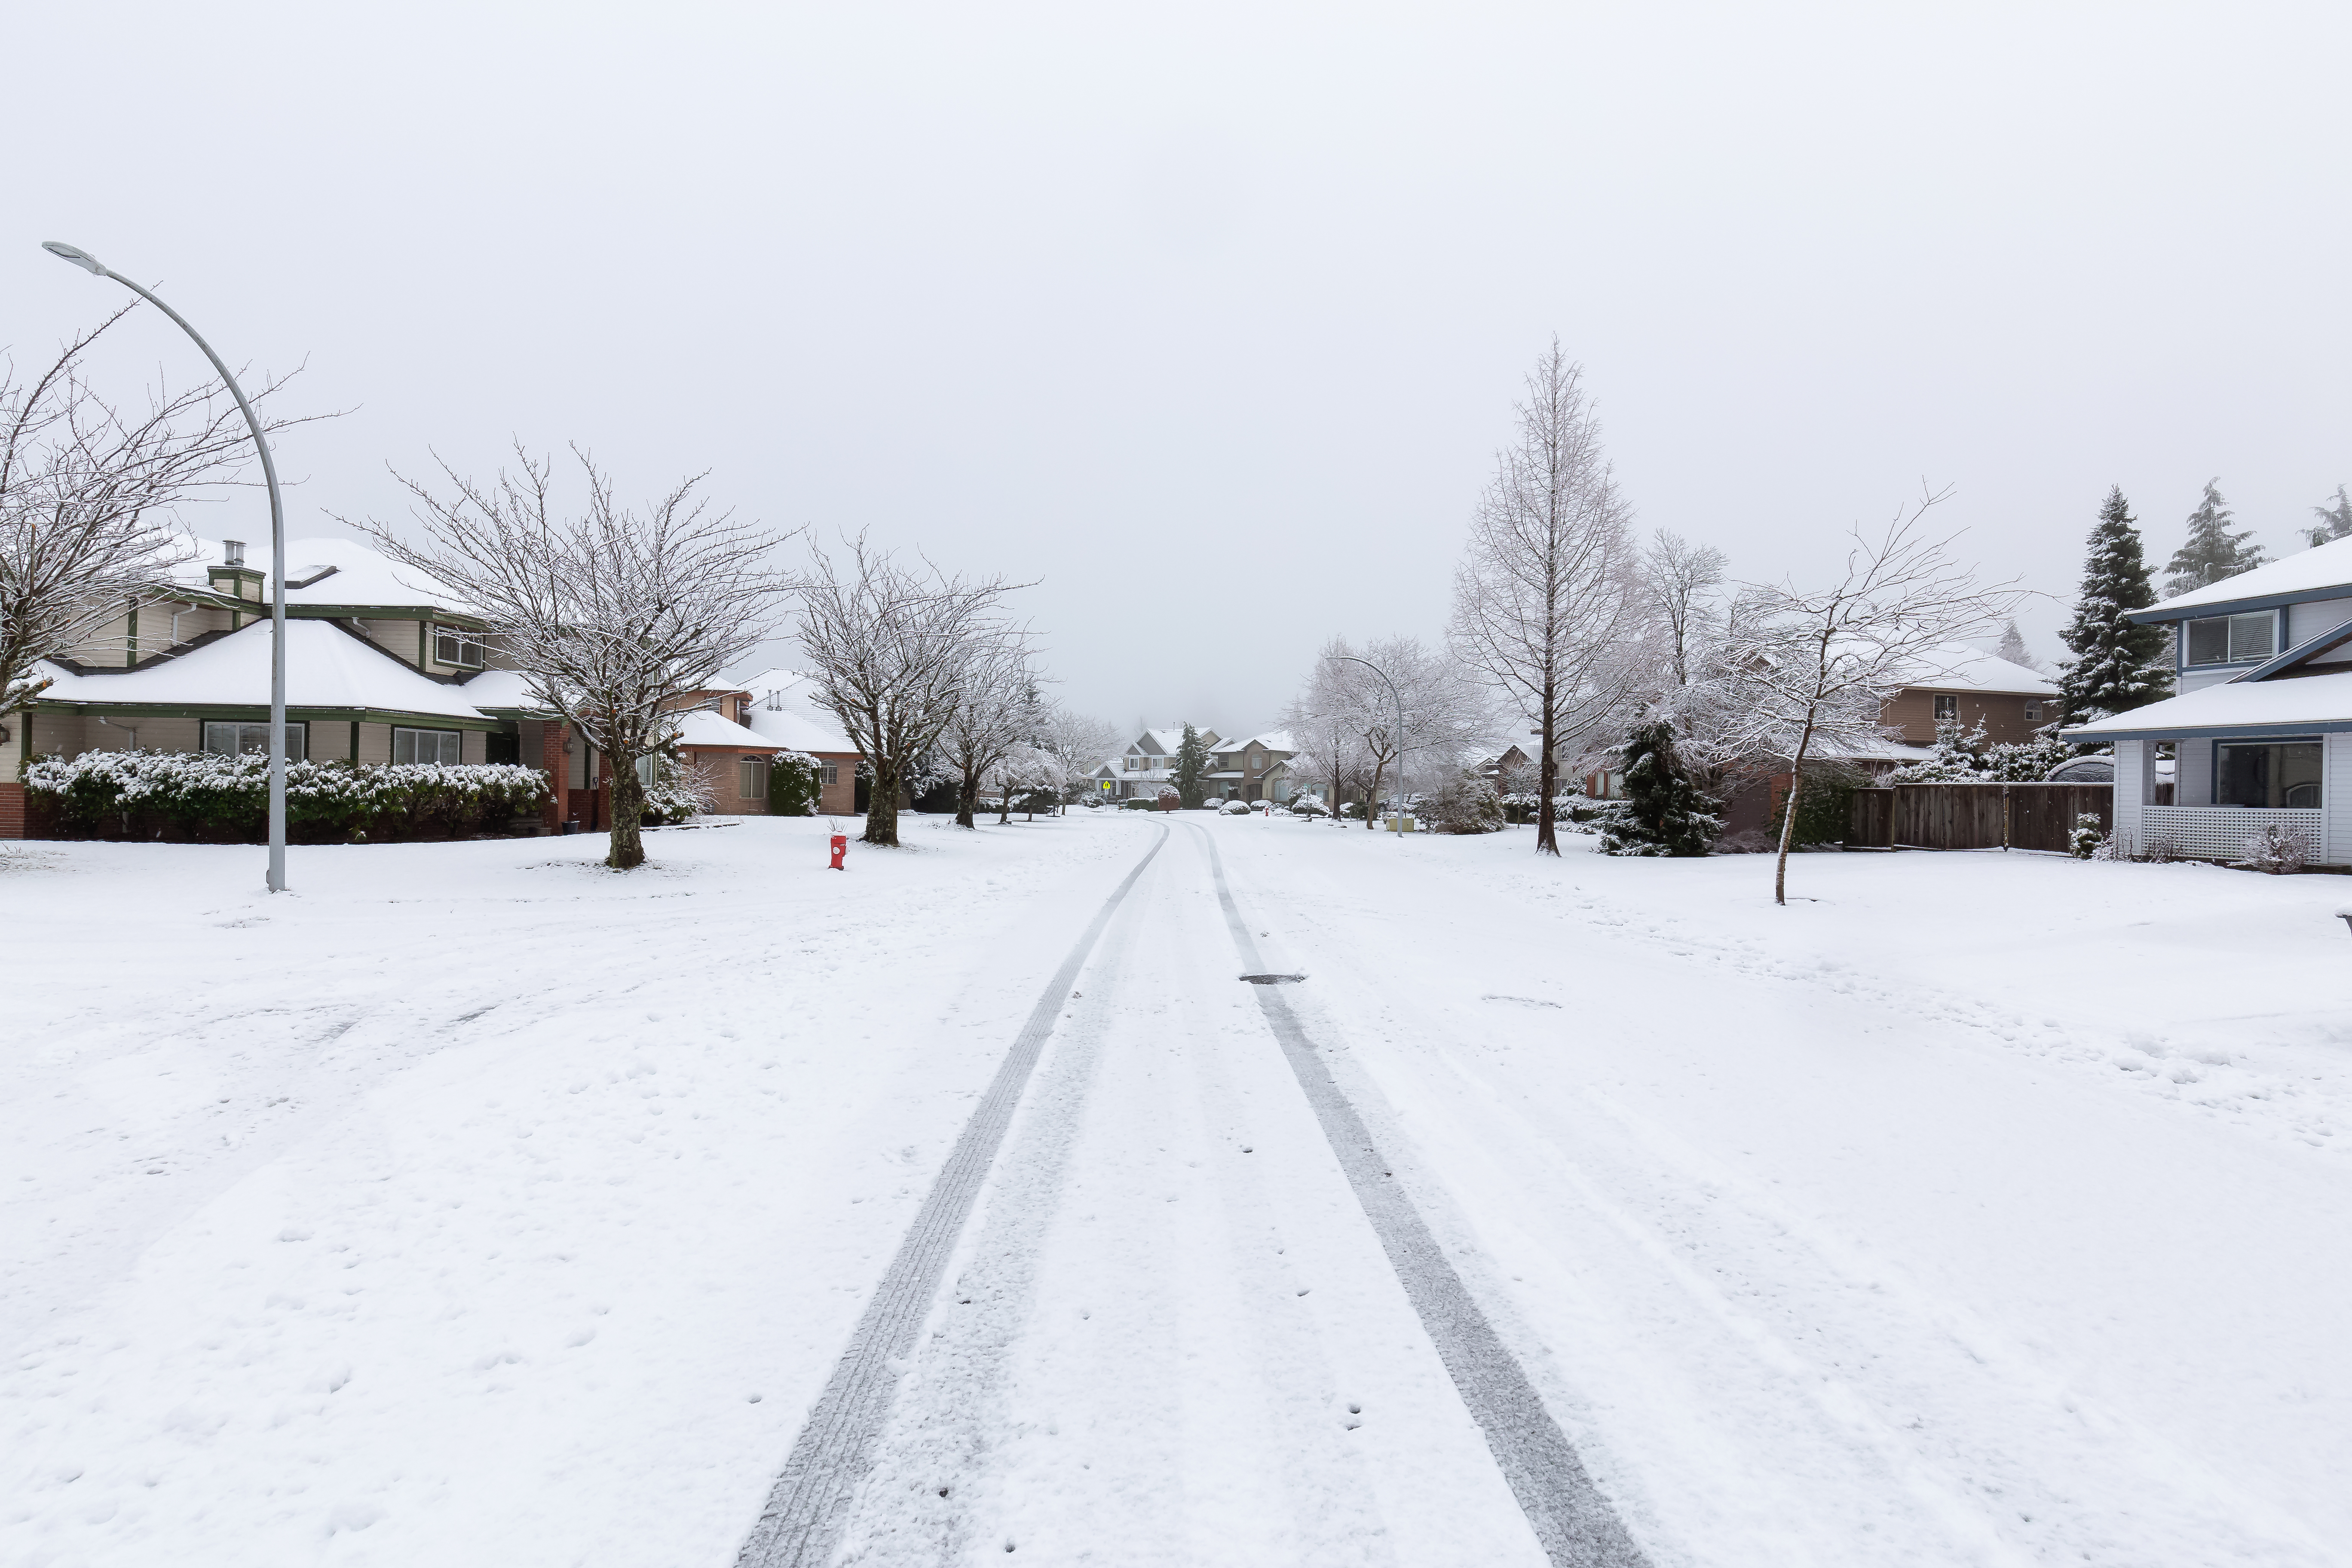 Residential Neighborhood in the Suburbs during a White Snow Storm